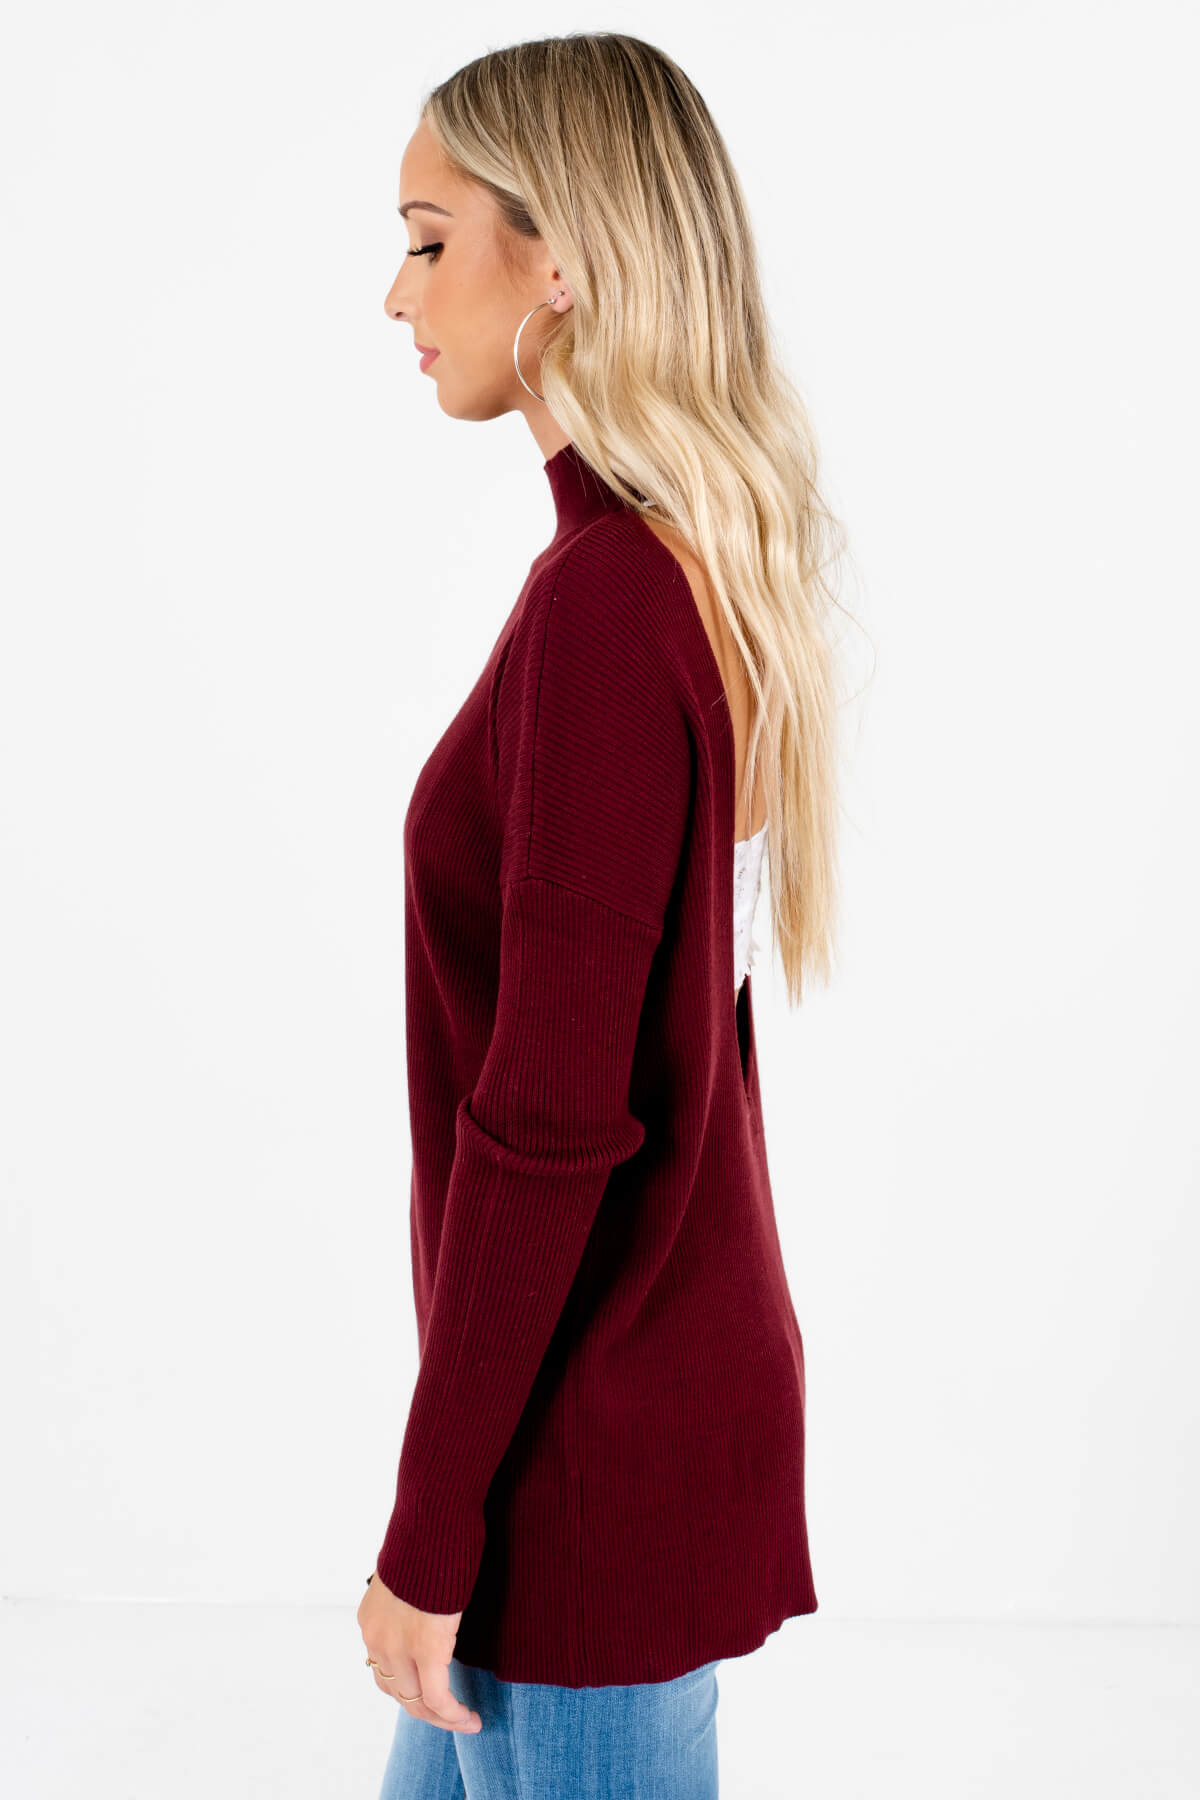 Burgundy Turtleneck Style Boutique Sweaters for Women